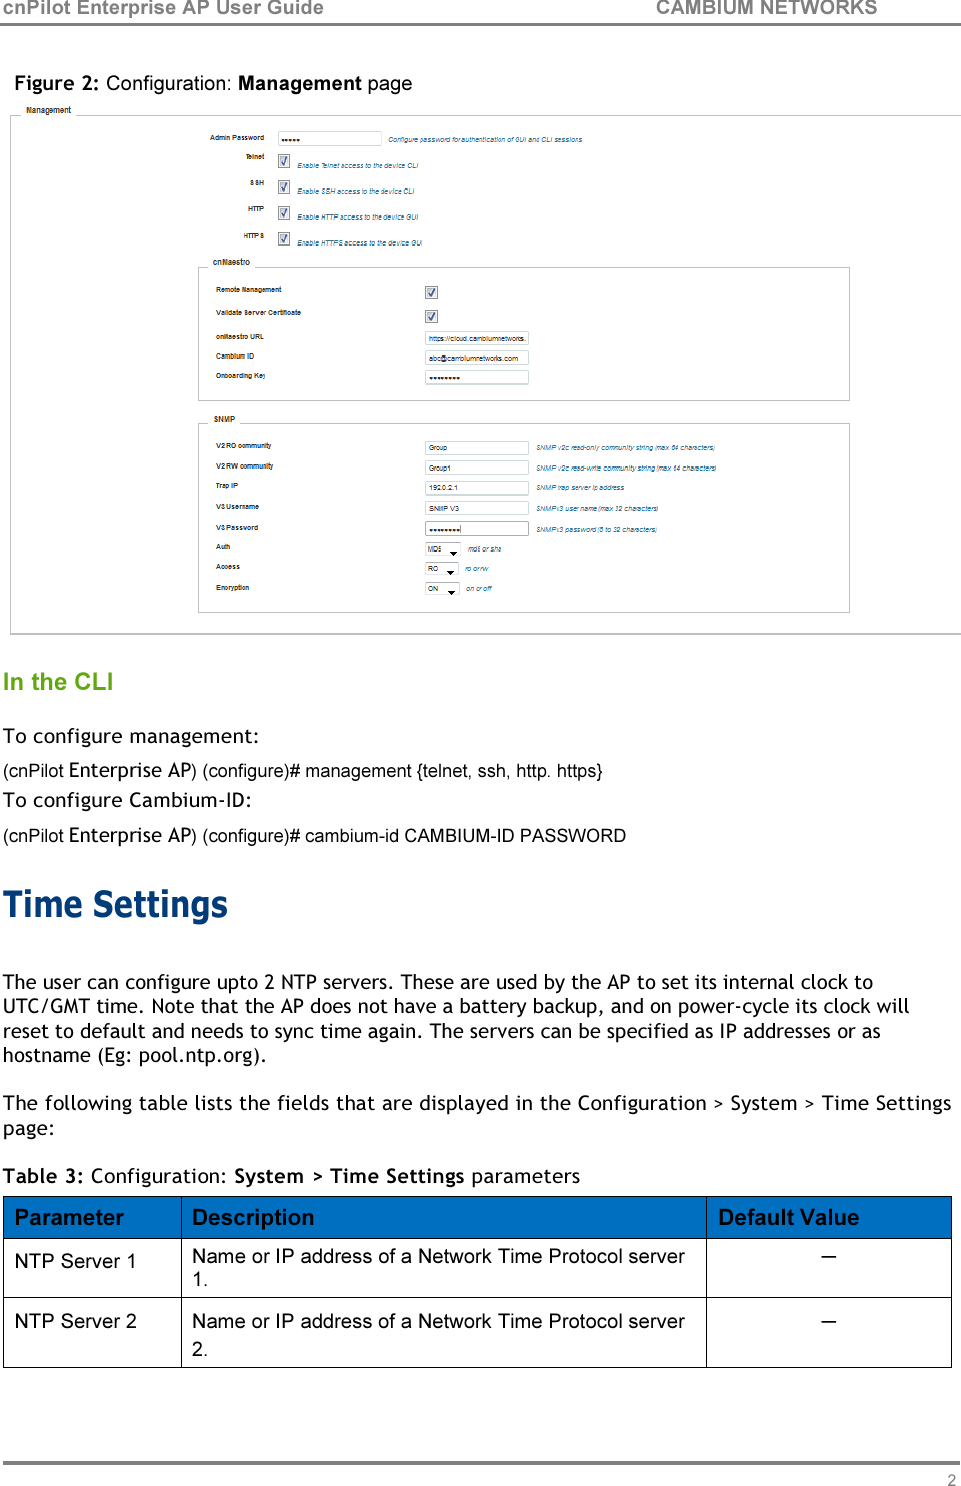 21 cnPilot Enterprise AP User Guide CAMBIUM NETWORKS     Figure 2: Configuration: Management page  In the CLI  To configure management: (cnPilot Enterprise AP) (configure)# management {telnet, ssh, http. https} To configure Cambium-ID: (cnPilot Enterprise AP) (configure)# cambium-id CAMBIUM-ID PASSWORD  Time Settings  The user can configure upto 2 NTP servers. These are used by the AP to set its internal clock to UTC/GMT time. Note that the AP does not have a battery backup, and on power-cycle its clock will reset to default and needs to sync time again. The servers can be specified as IP addresses or as hostname (Eg: pool.ntp.org).  The following table lists the fields that are displayed in the Configuration &gt; System &gt; Time Settings page:  Table 3: Configuration: System &gt; Time Settings parameters  Parameter  Description  Default Value NTP Server 1  Name or IP address of a Network Time Protocol server 1. ─ NTP Server 2  Name or IP address of a Network Time Protocol server 2. ─ 